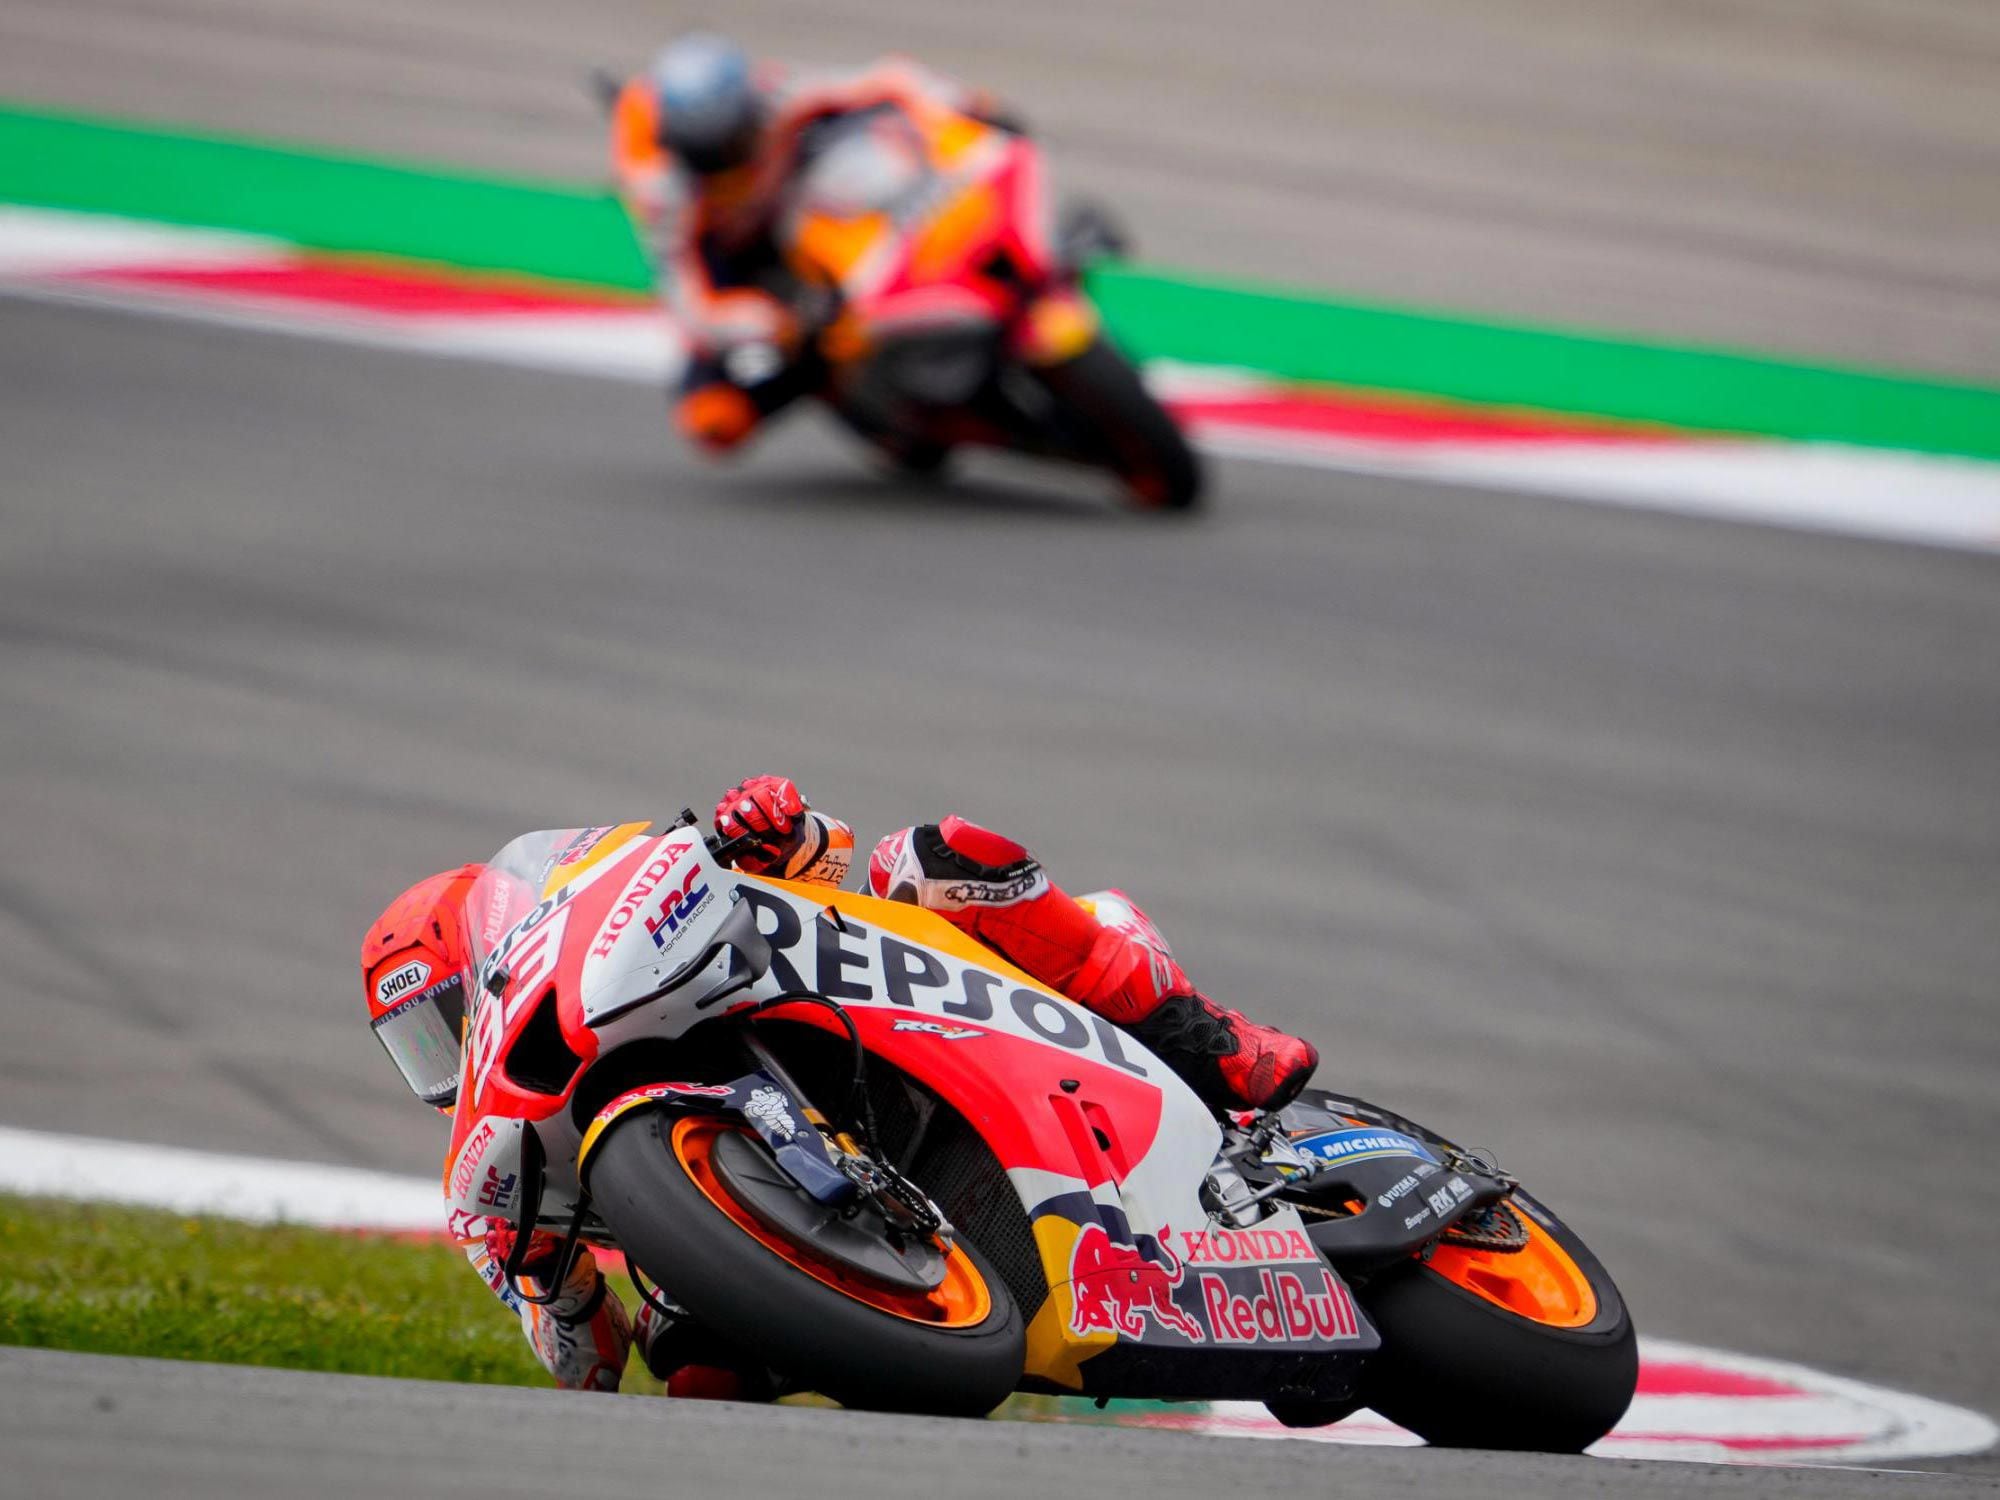 Honda’s Marc Márquez finished sixth in Portugal, clearly still not at 100 percent, but looking better.